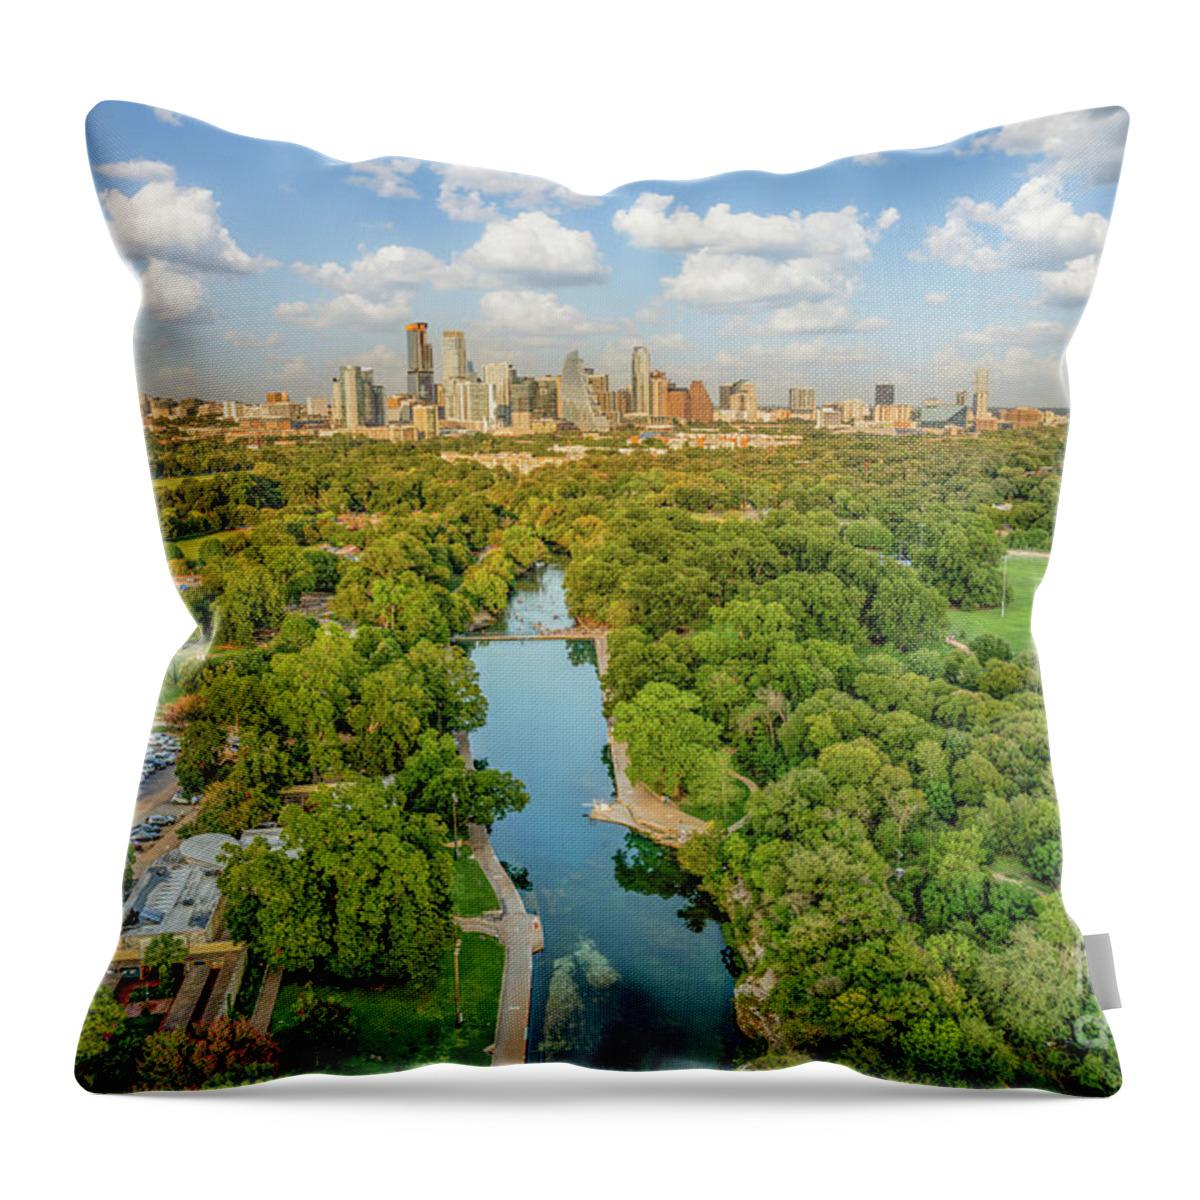 Barton Springs Pool Throw Pillow featuring the photograph Austin Barton Springs Pool with Skyline by Bee Creek Photography - Tod and Cynthia